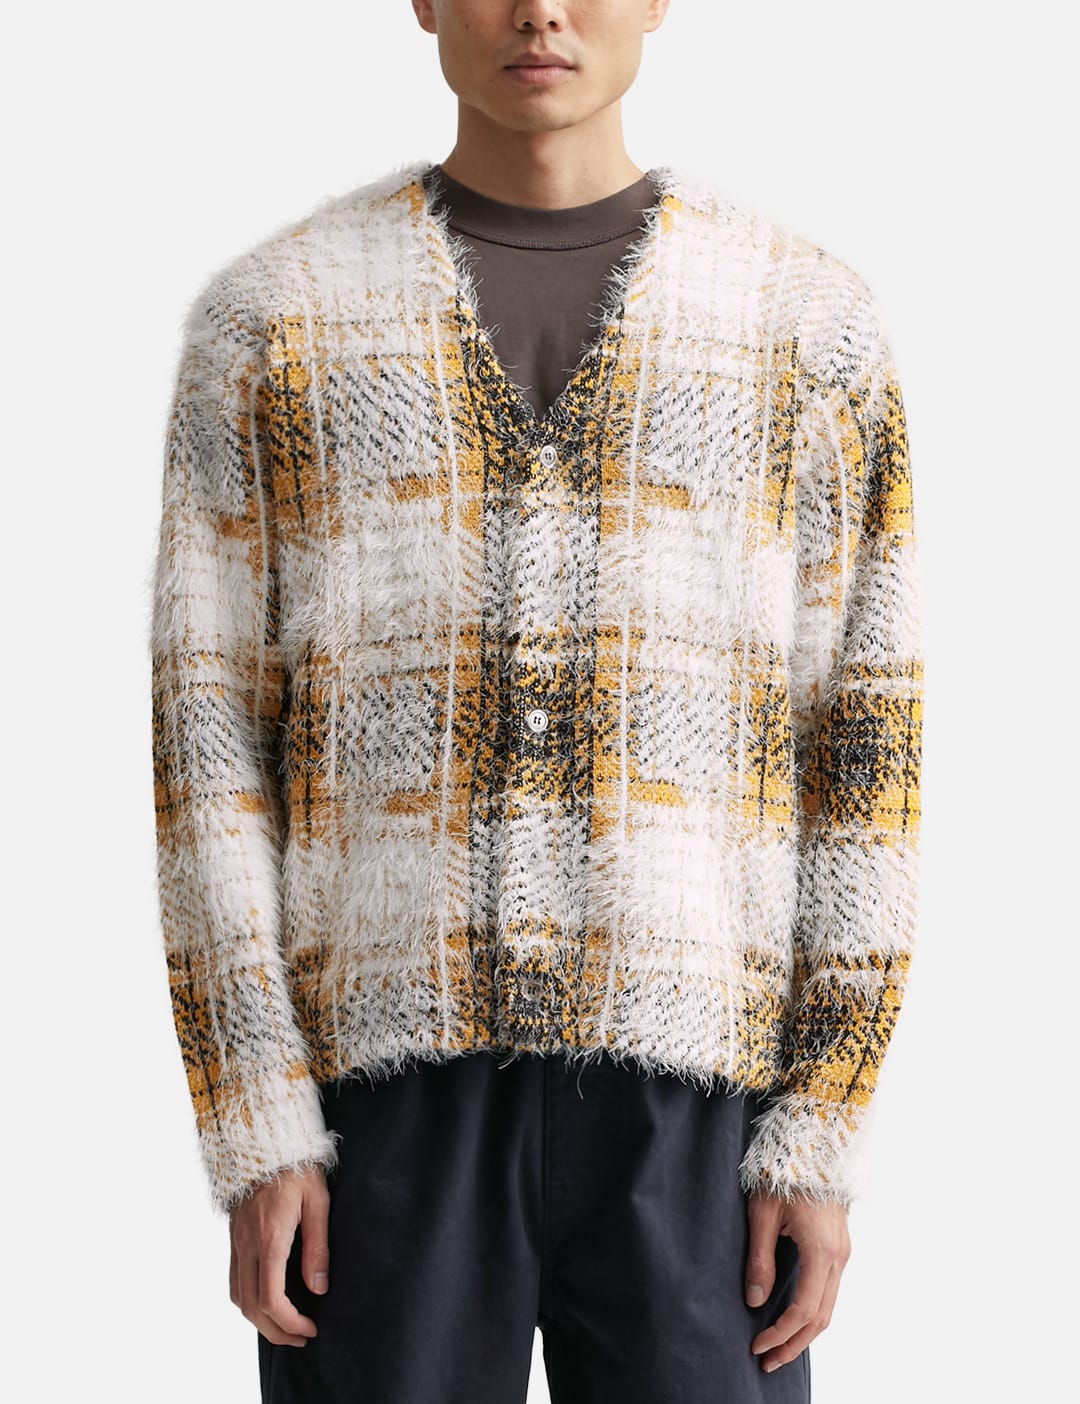 Stüssy - Hairy Plaid Cardigan | HBX - Globally Curated Fashion and